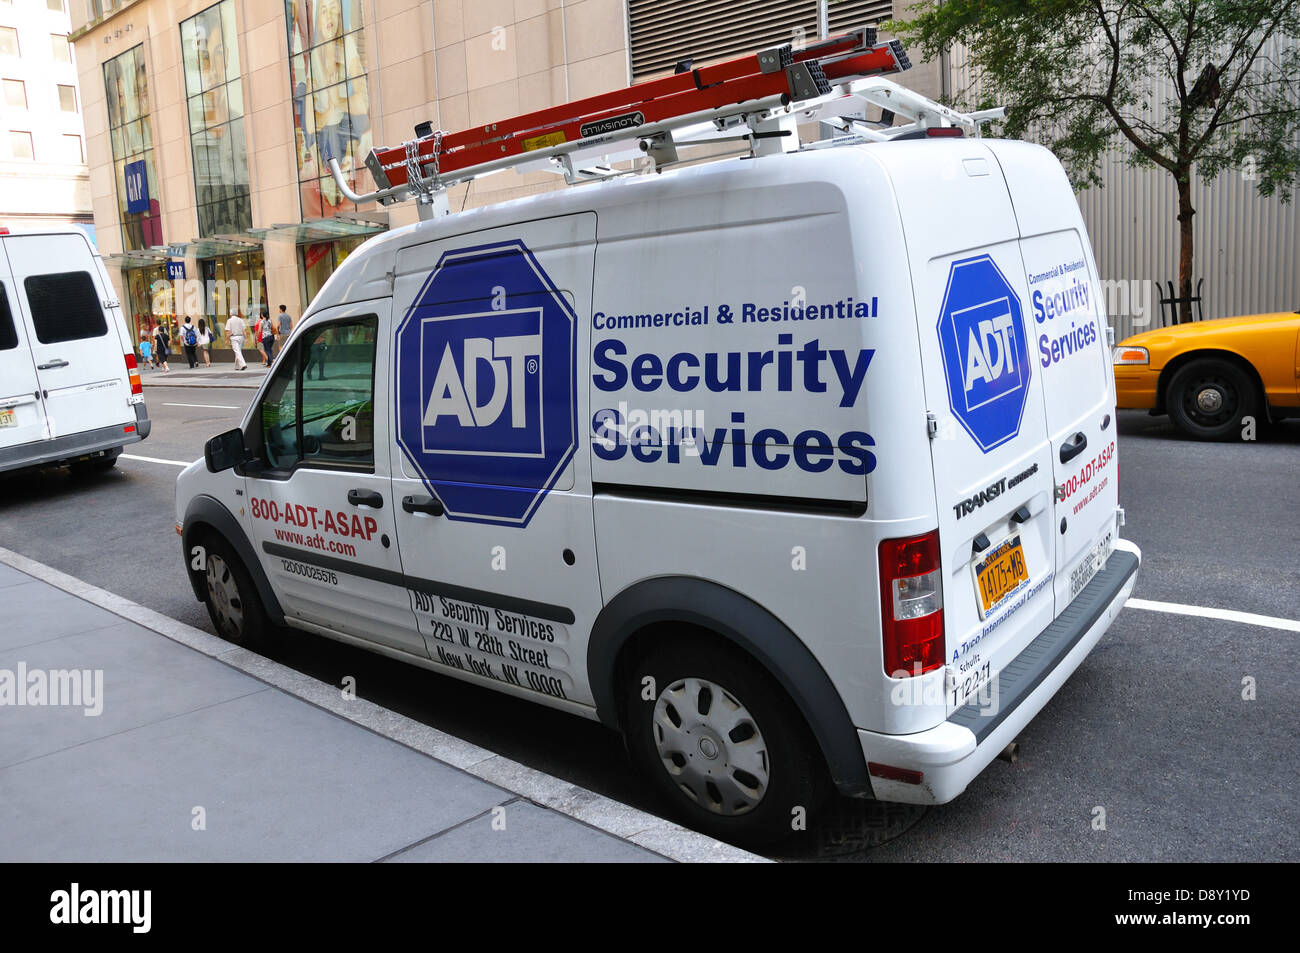 ADT Security Services van in New York City, USA Stock Photo